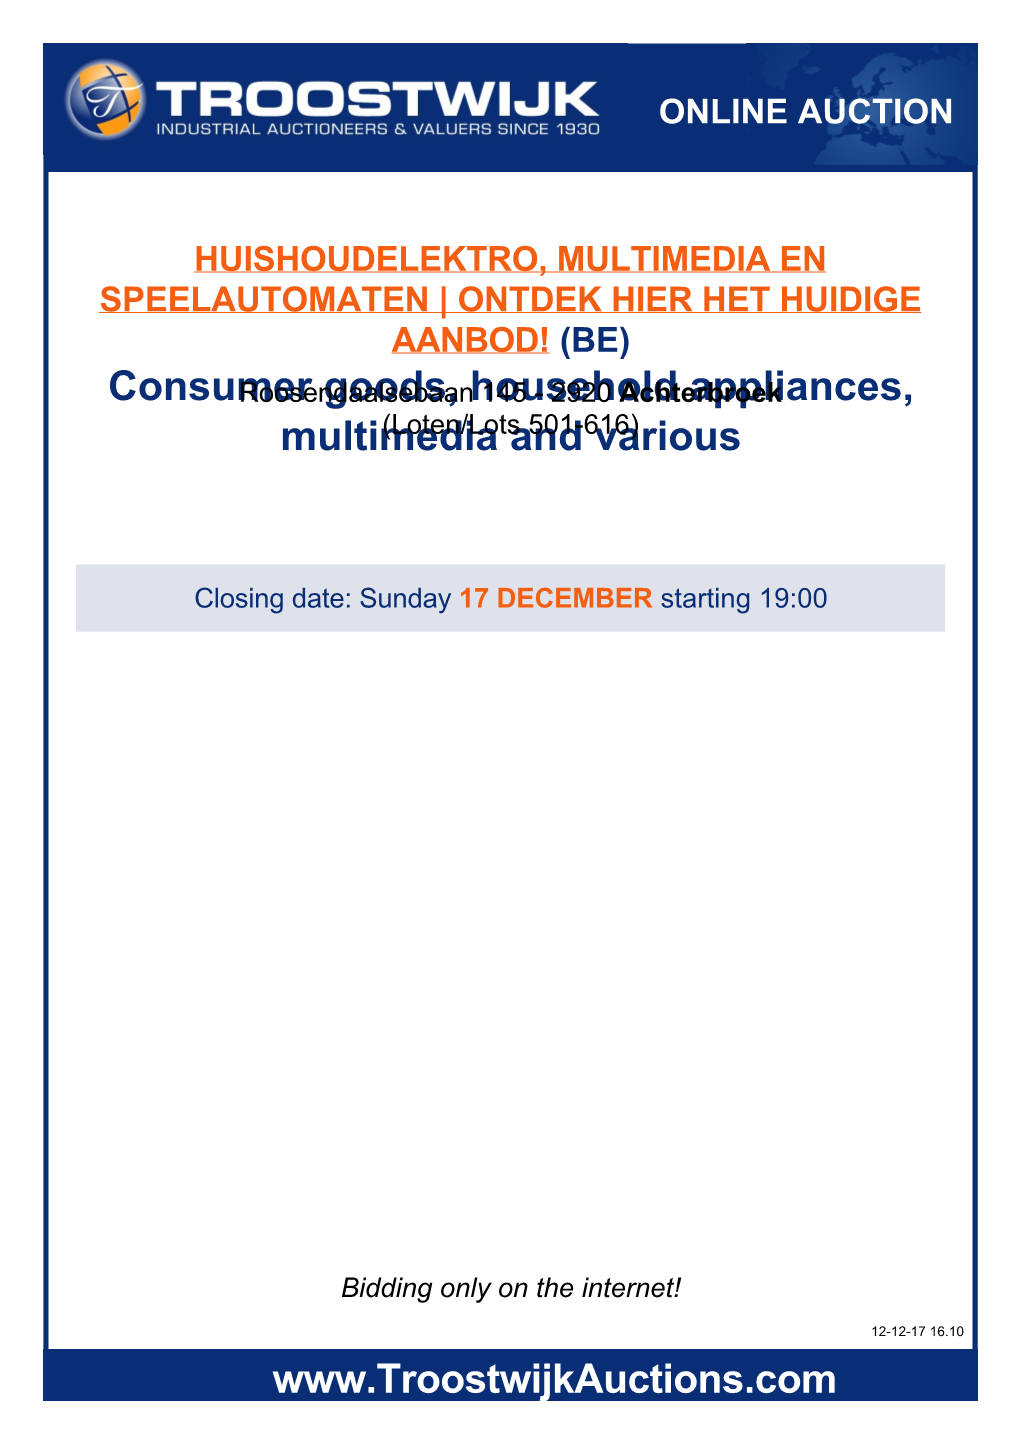 Consumer Goods, Household Appliances, Multimedia and Various